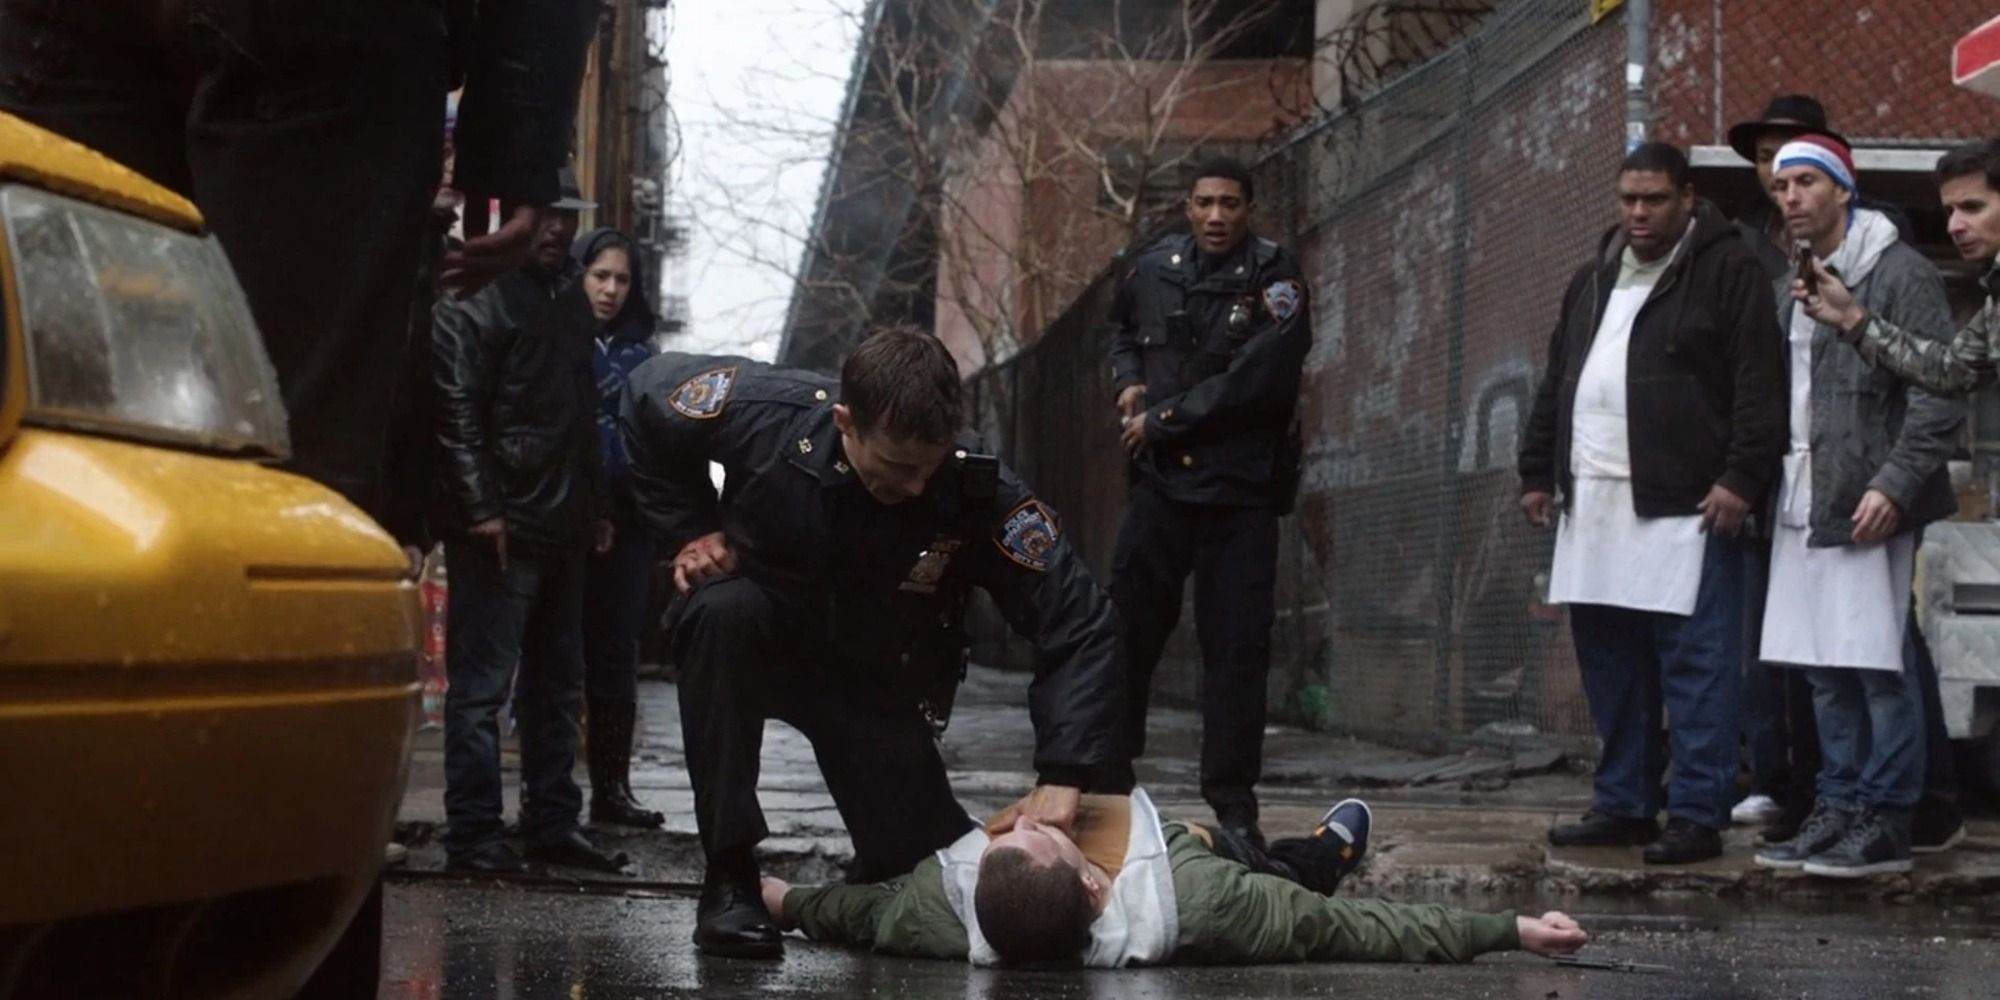 Danny (Donny Wahlberg) checks pulse of a body in Blue Bloods